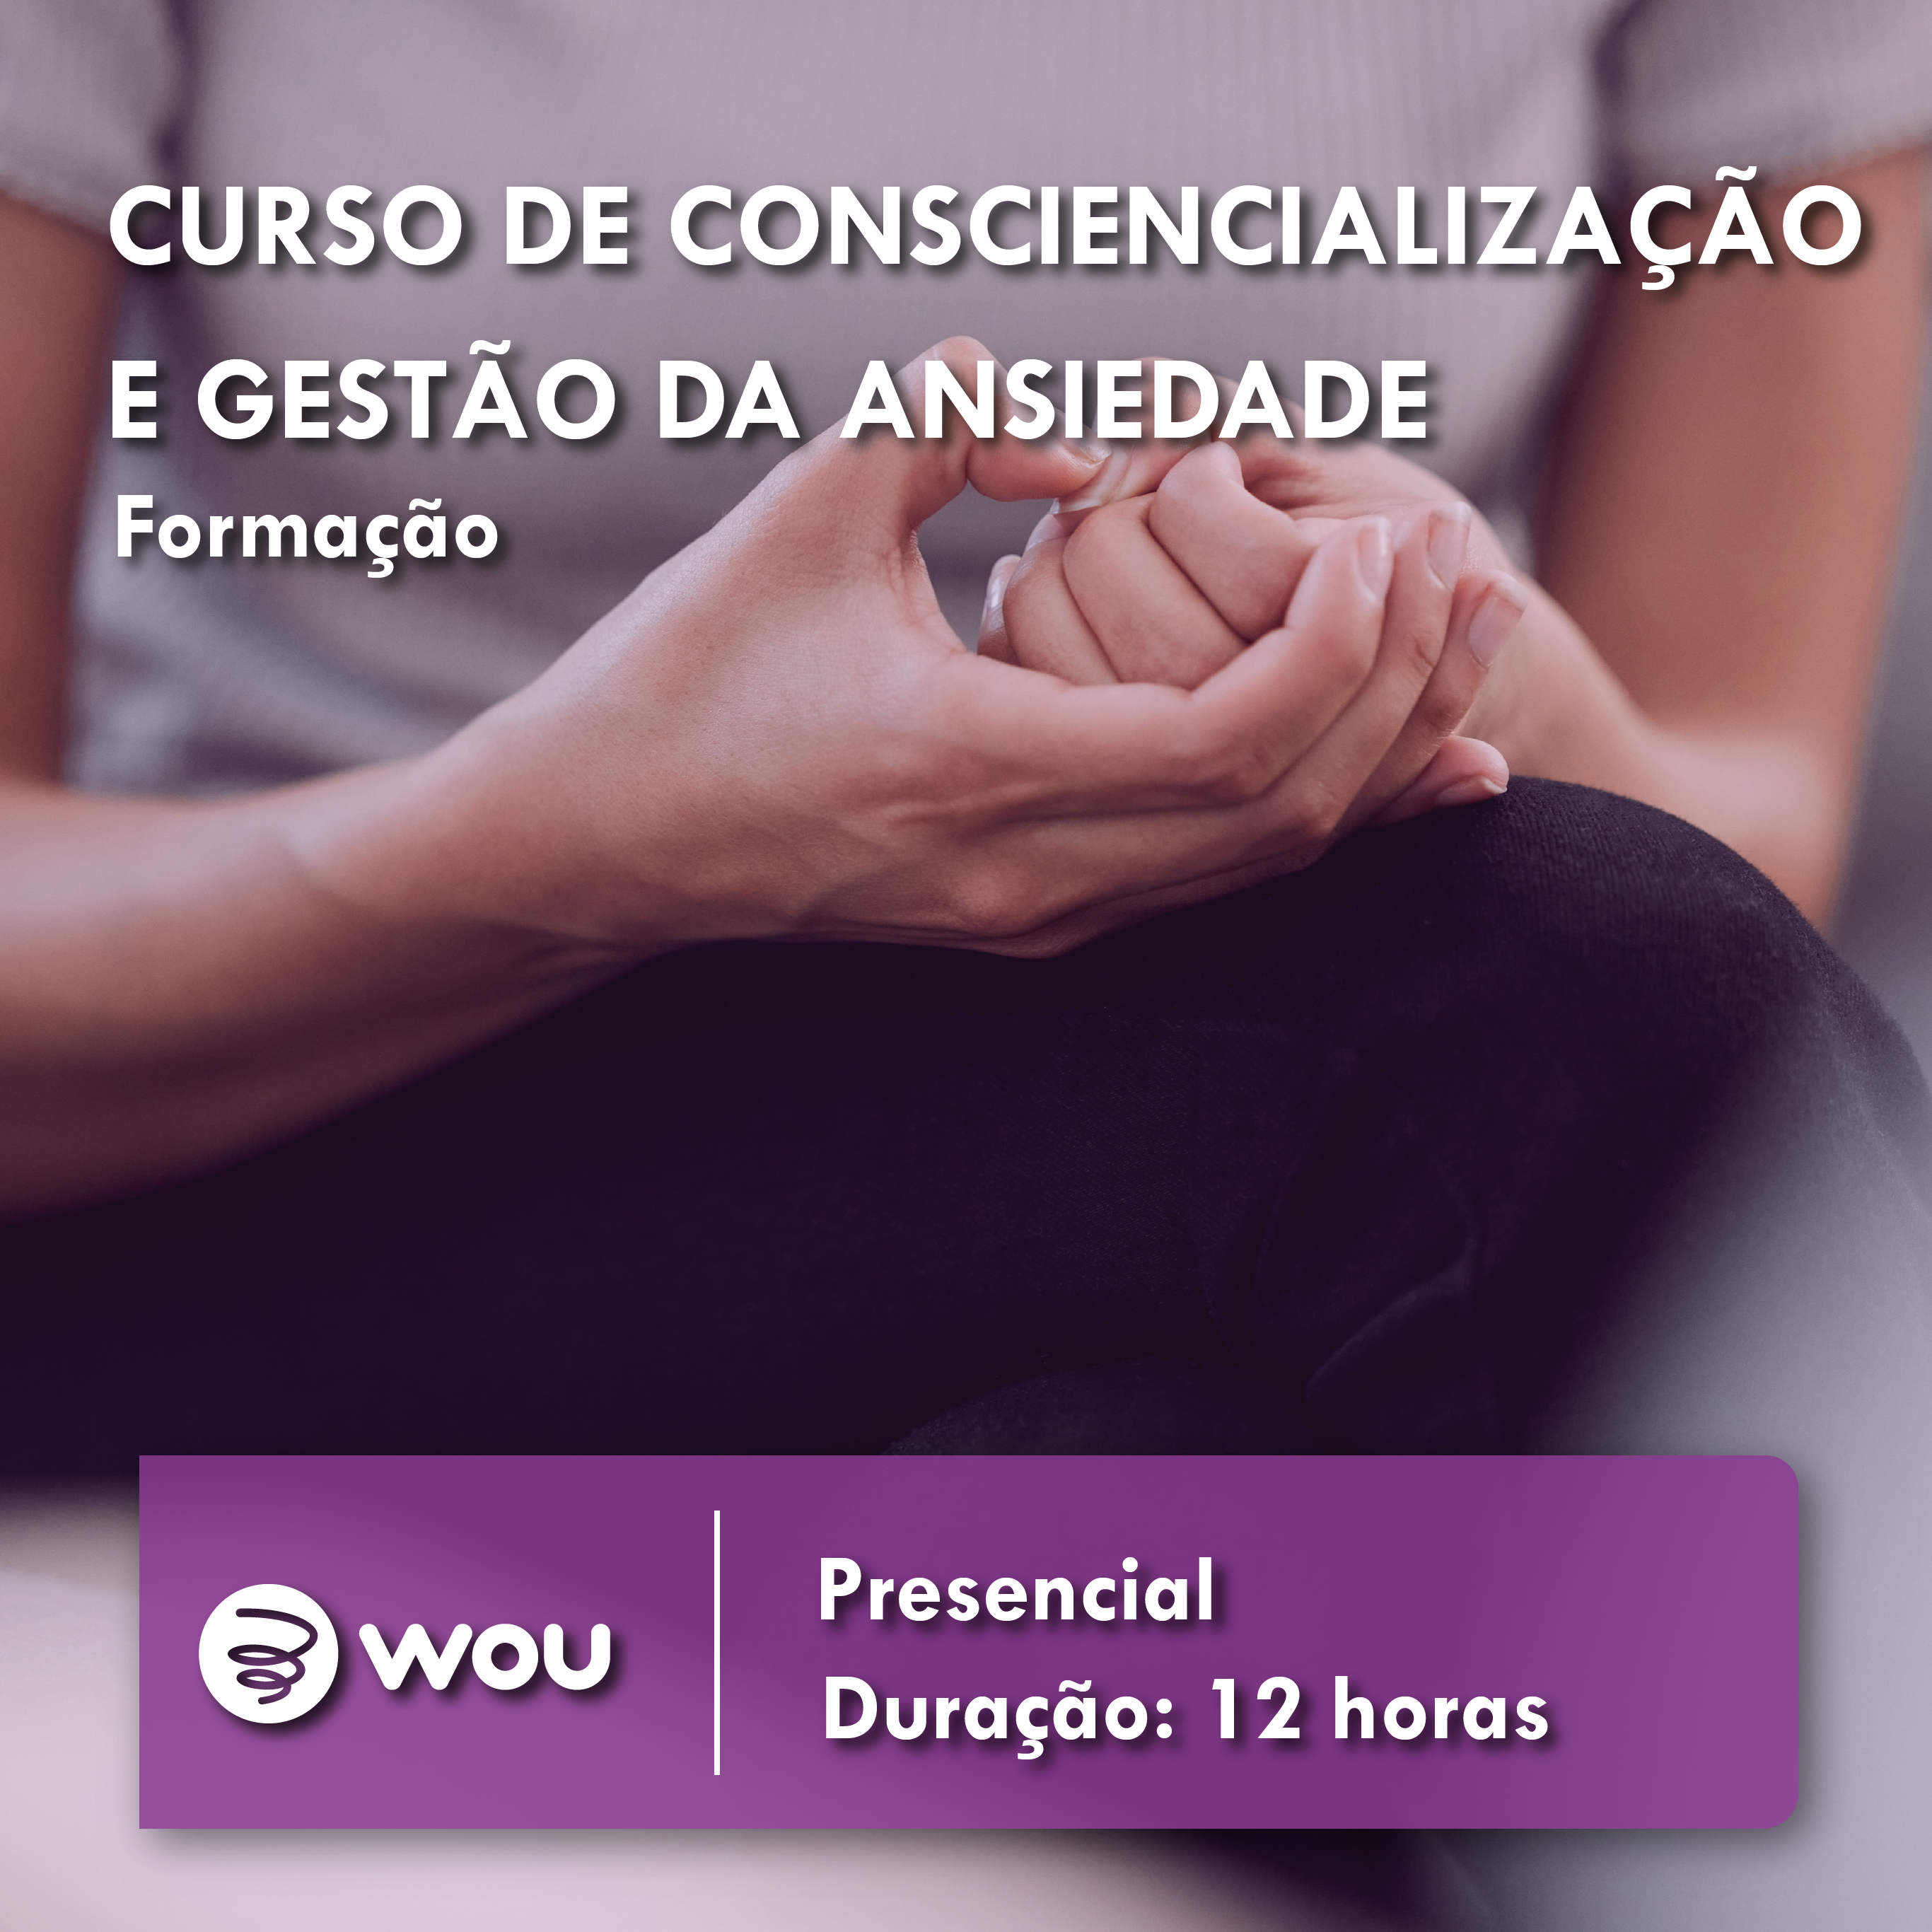 Course on Anxiety Awareness and Management in Lisbon